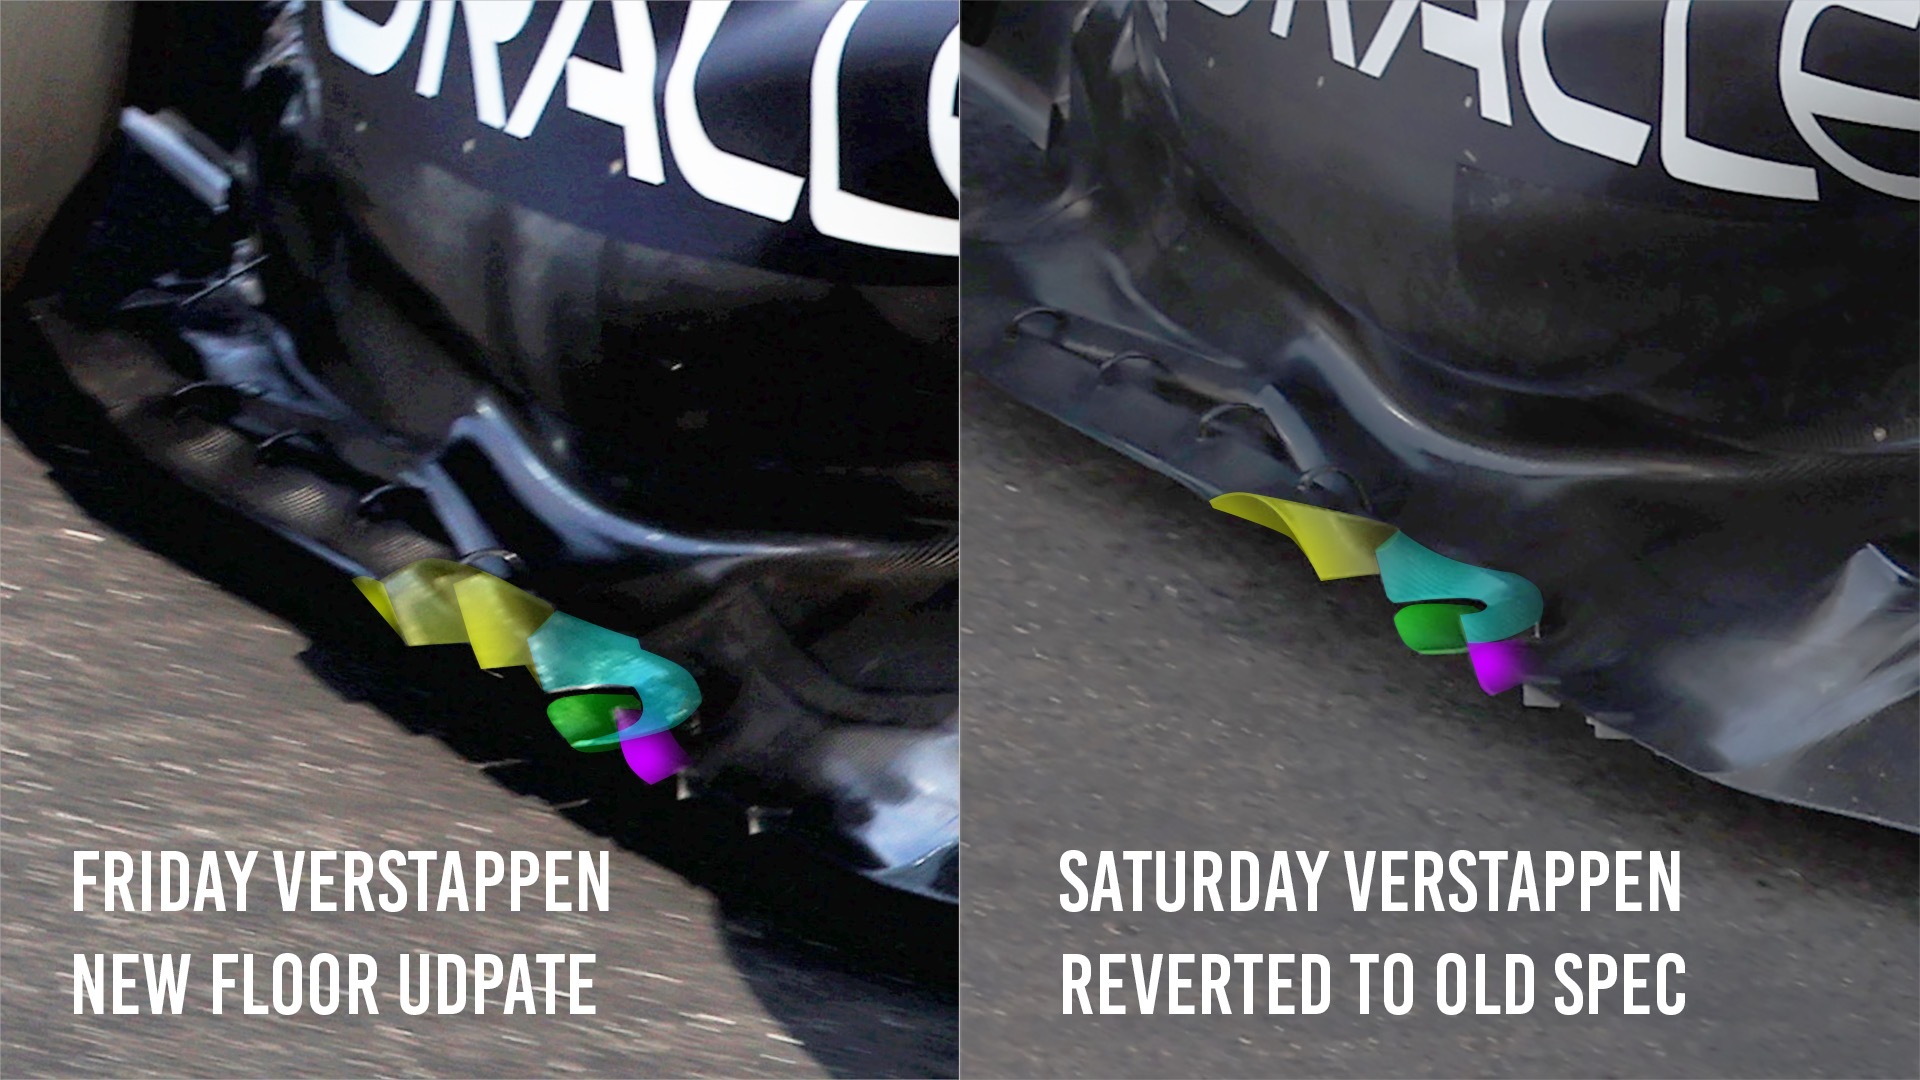 red bull reverted to old floor but has more ‘inherent problems’